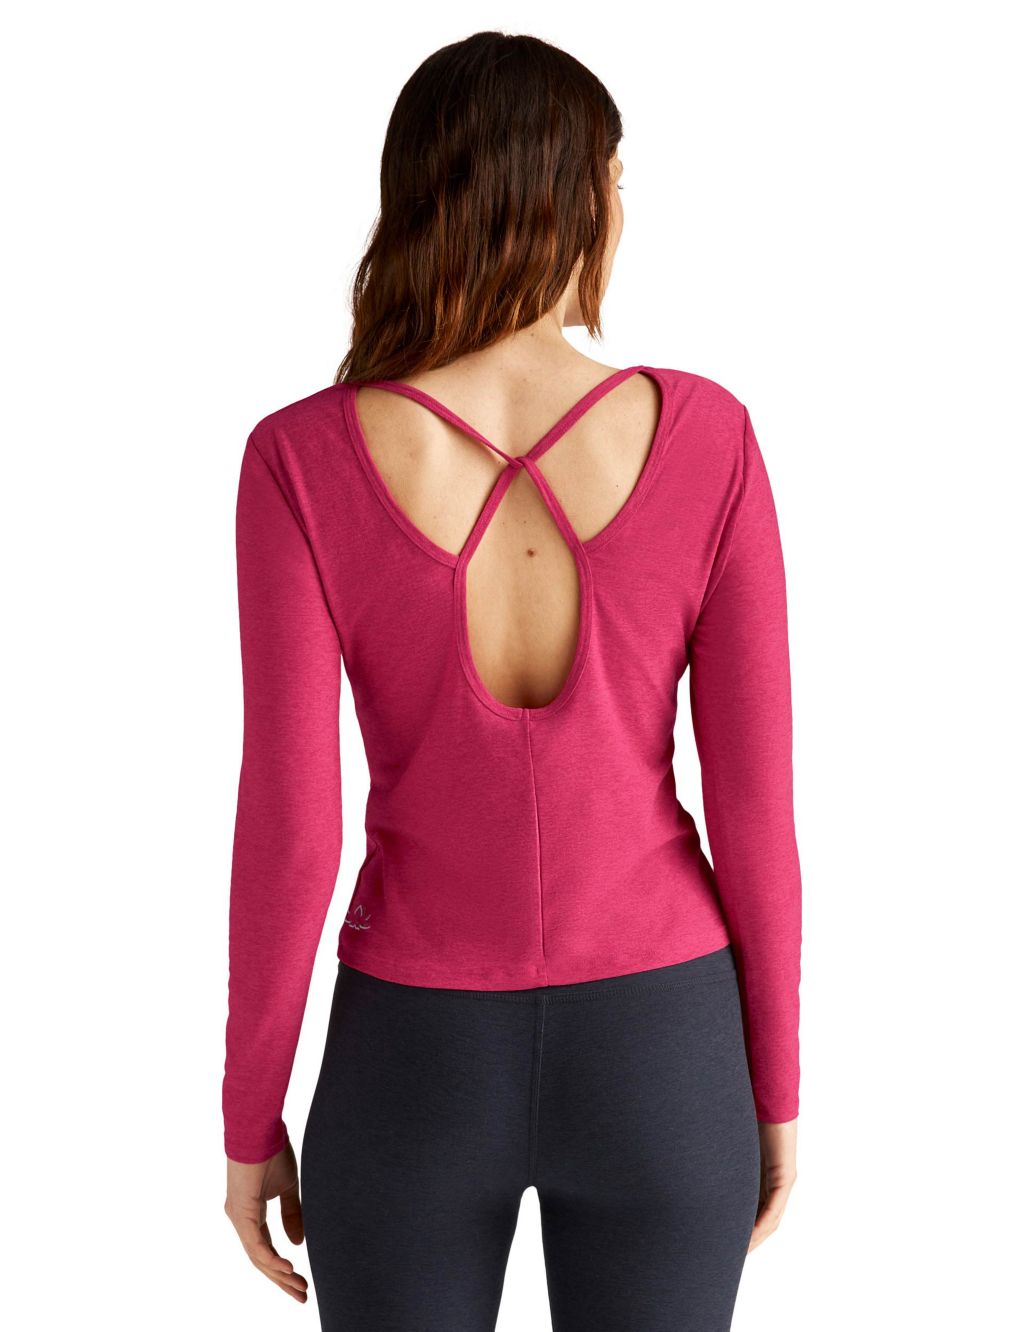 Featherweight Open Back Fitted Yoga Top image 3